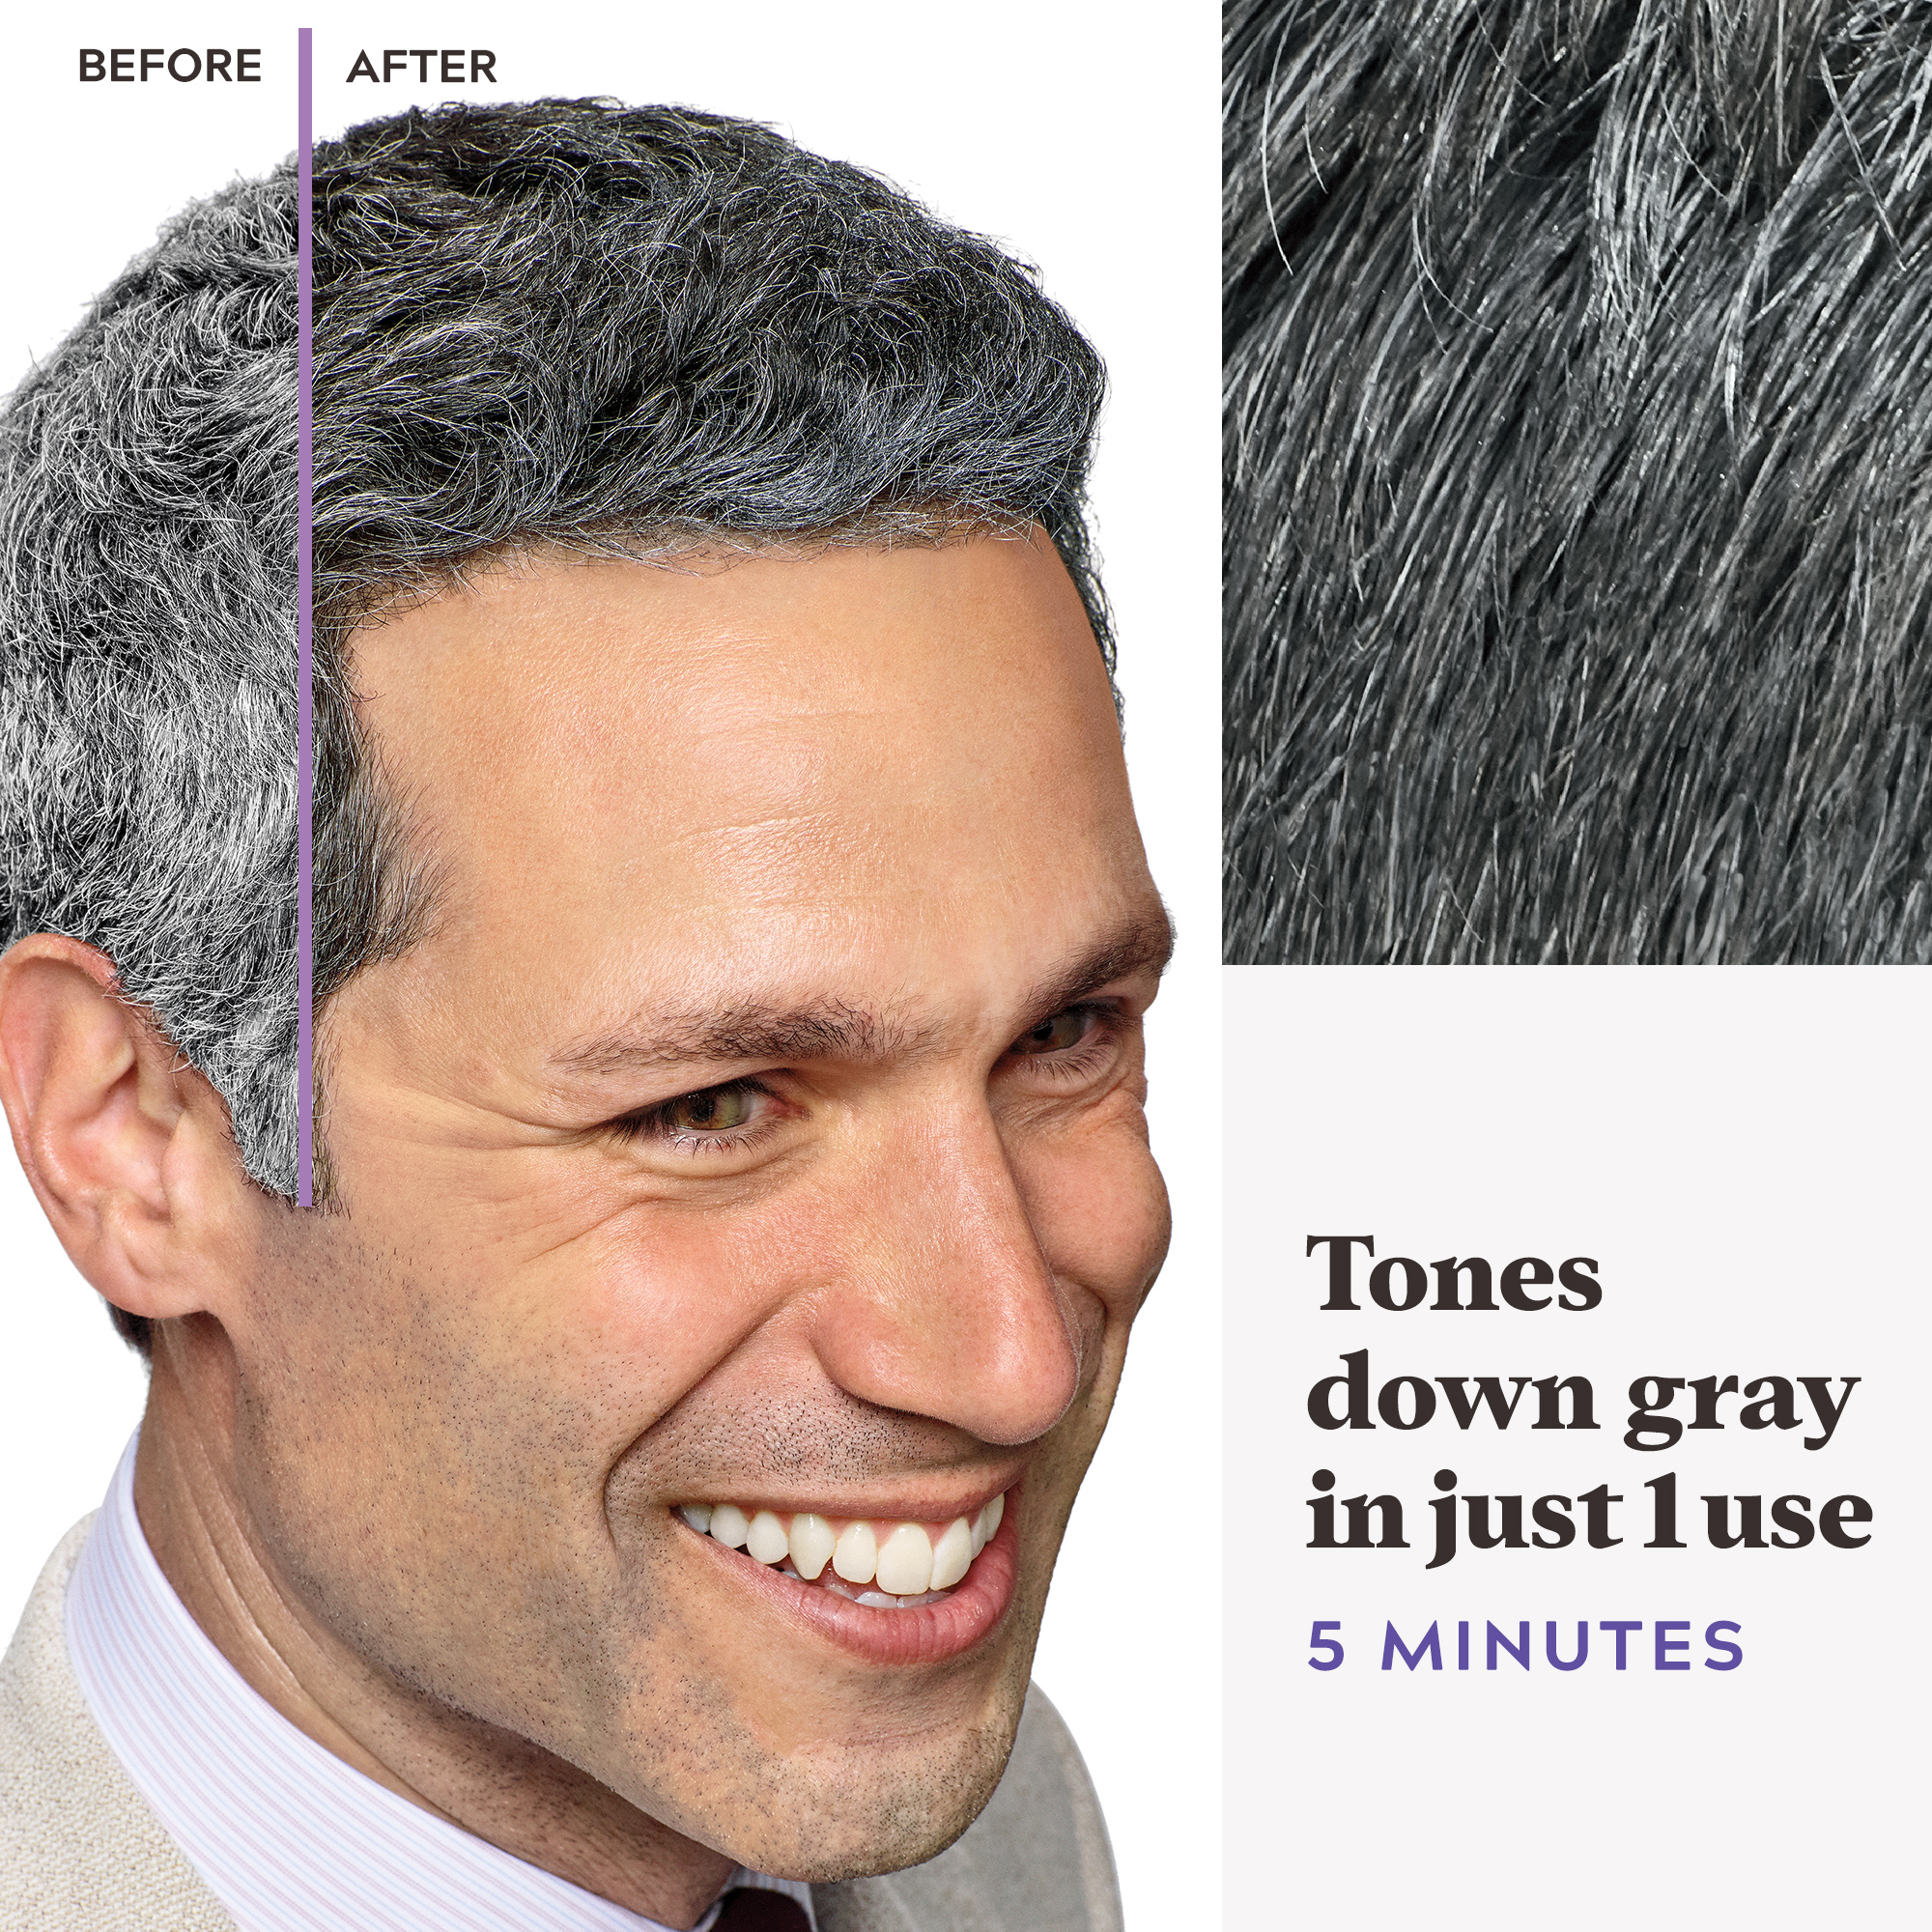 Just For Men Touch of Gray Hair Color with Comb Applicator, T-55 Black - image 5 of 7